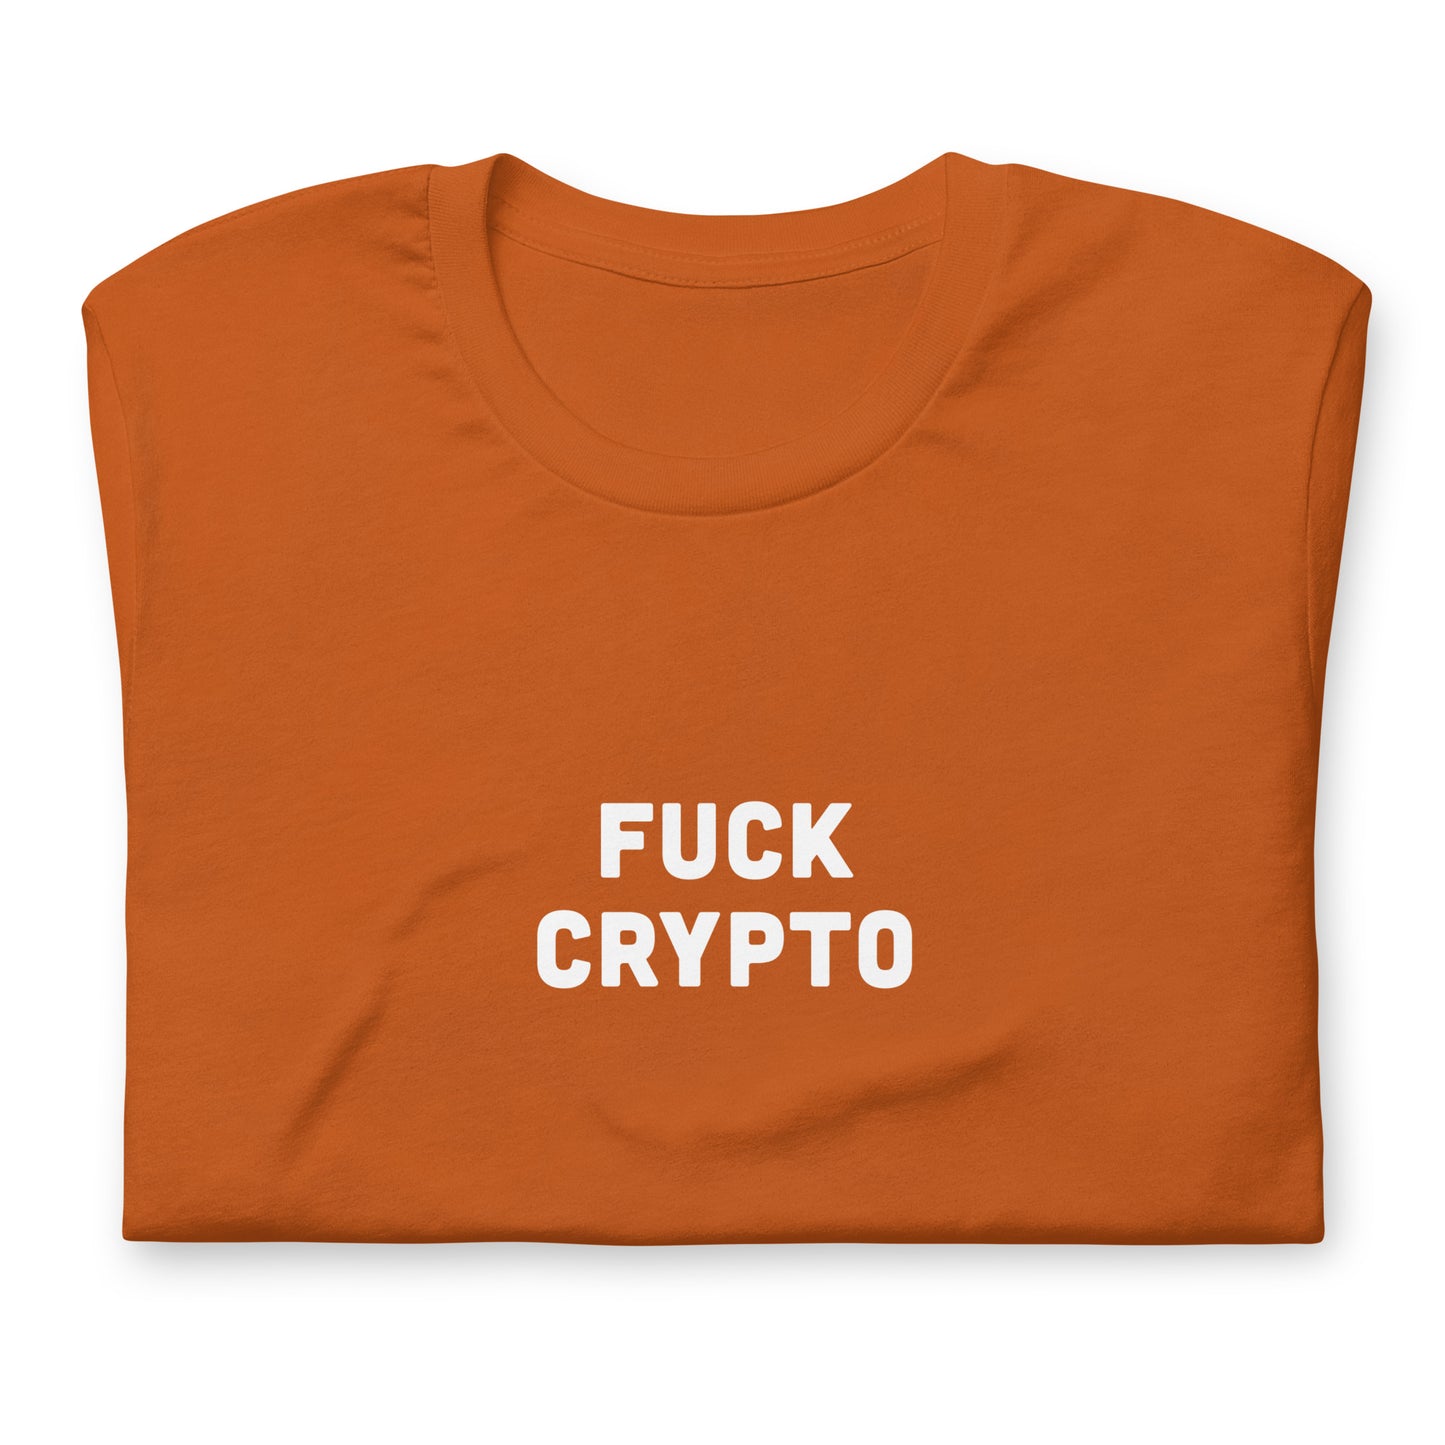 Fuck Crypto T-Shirt Size M Color Navy